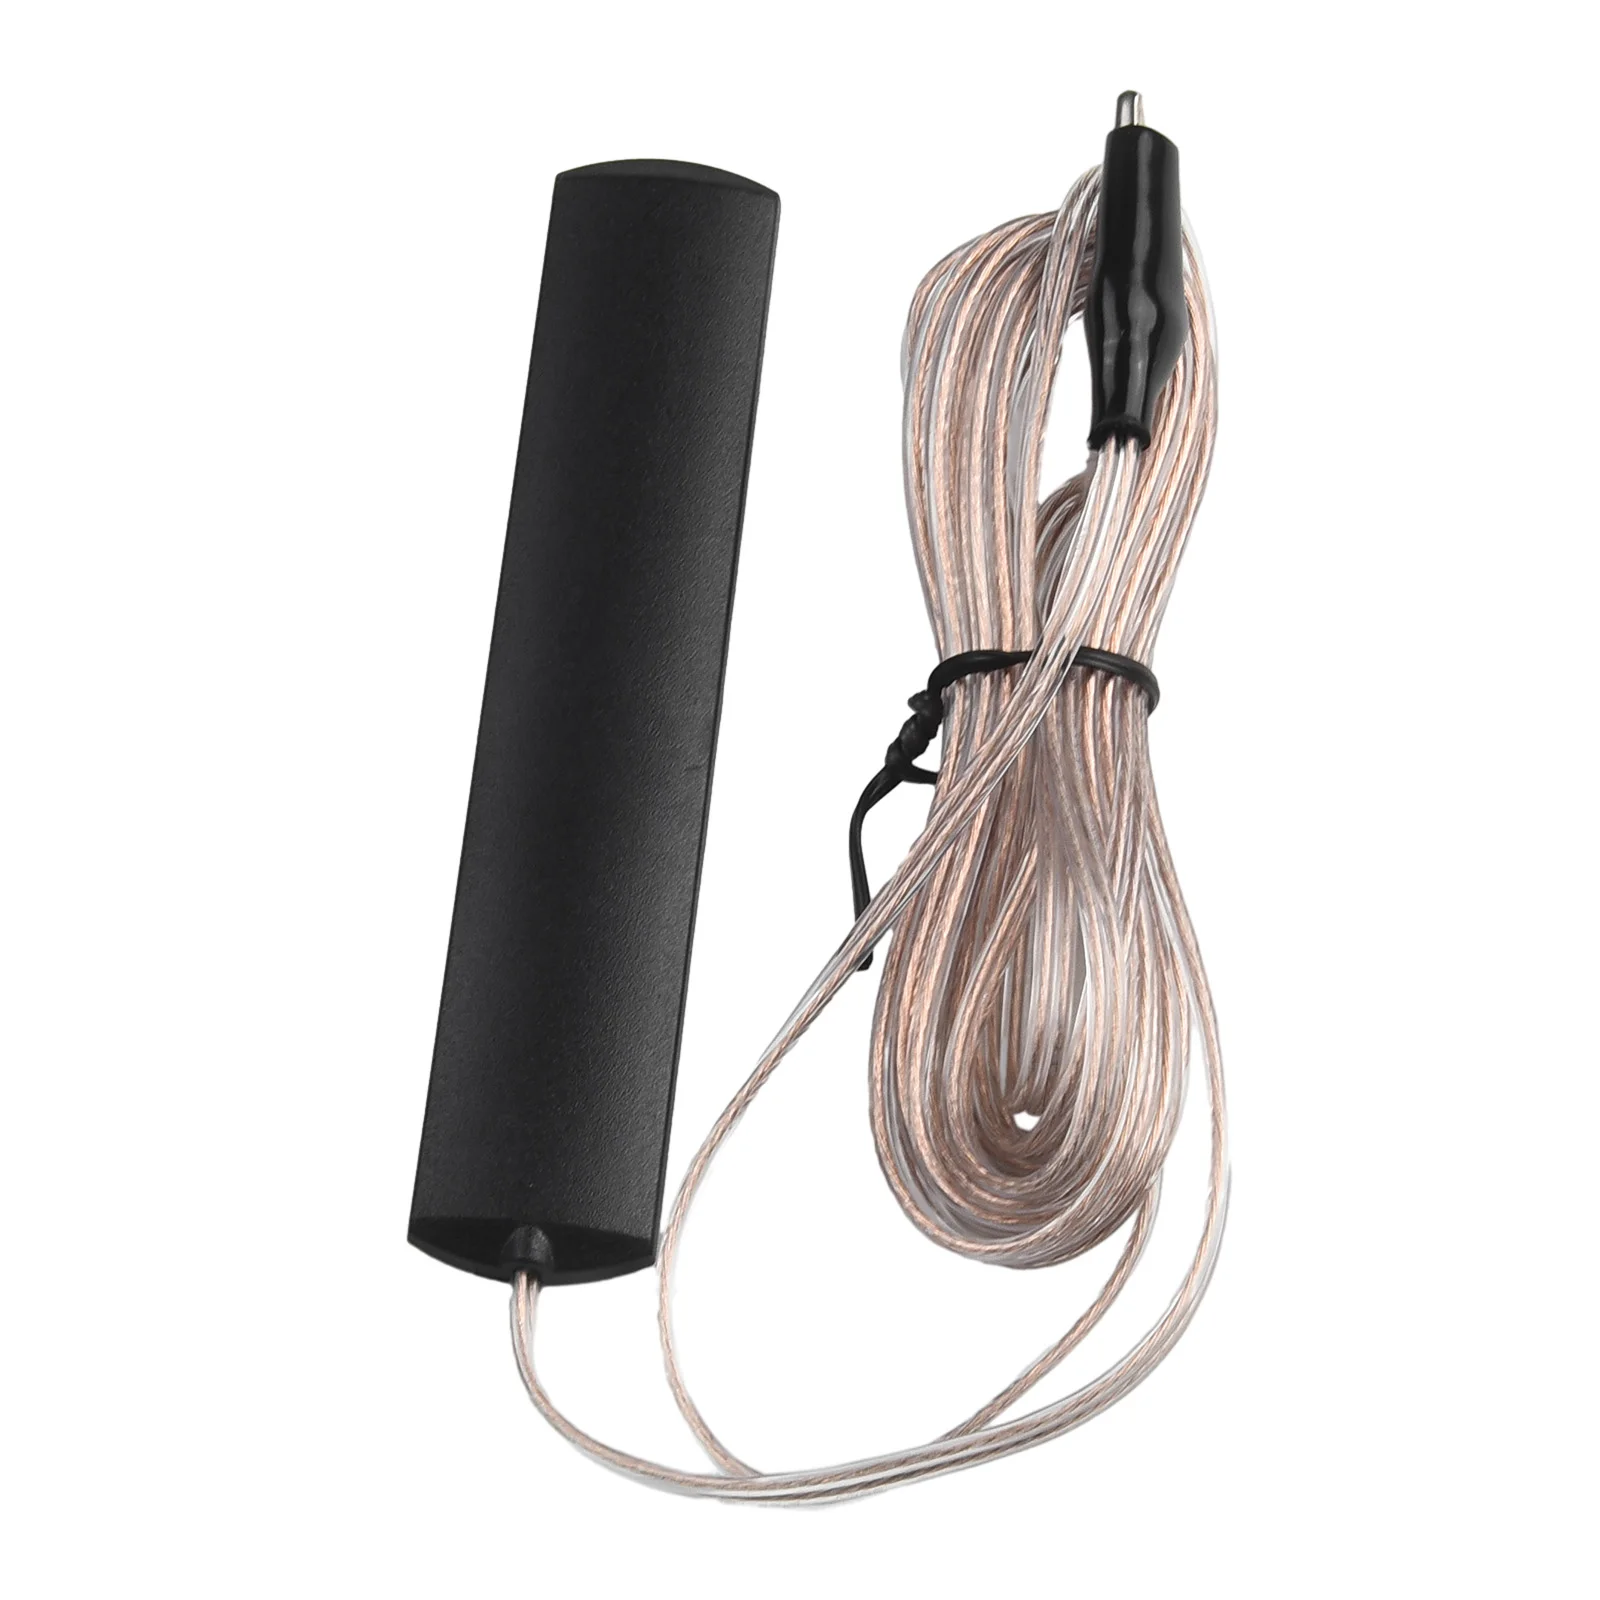 

Clip On Radio FM Stereo Antenna Indoor Signal Enhance Stable Transfer Wide Compatible 3.2m Cable Alligator Connector